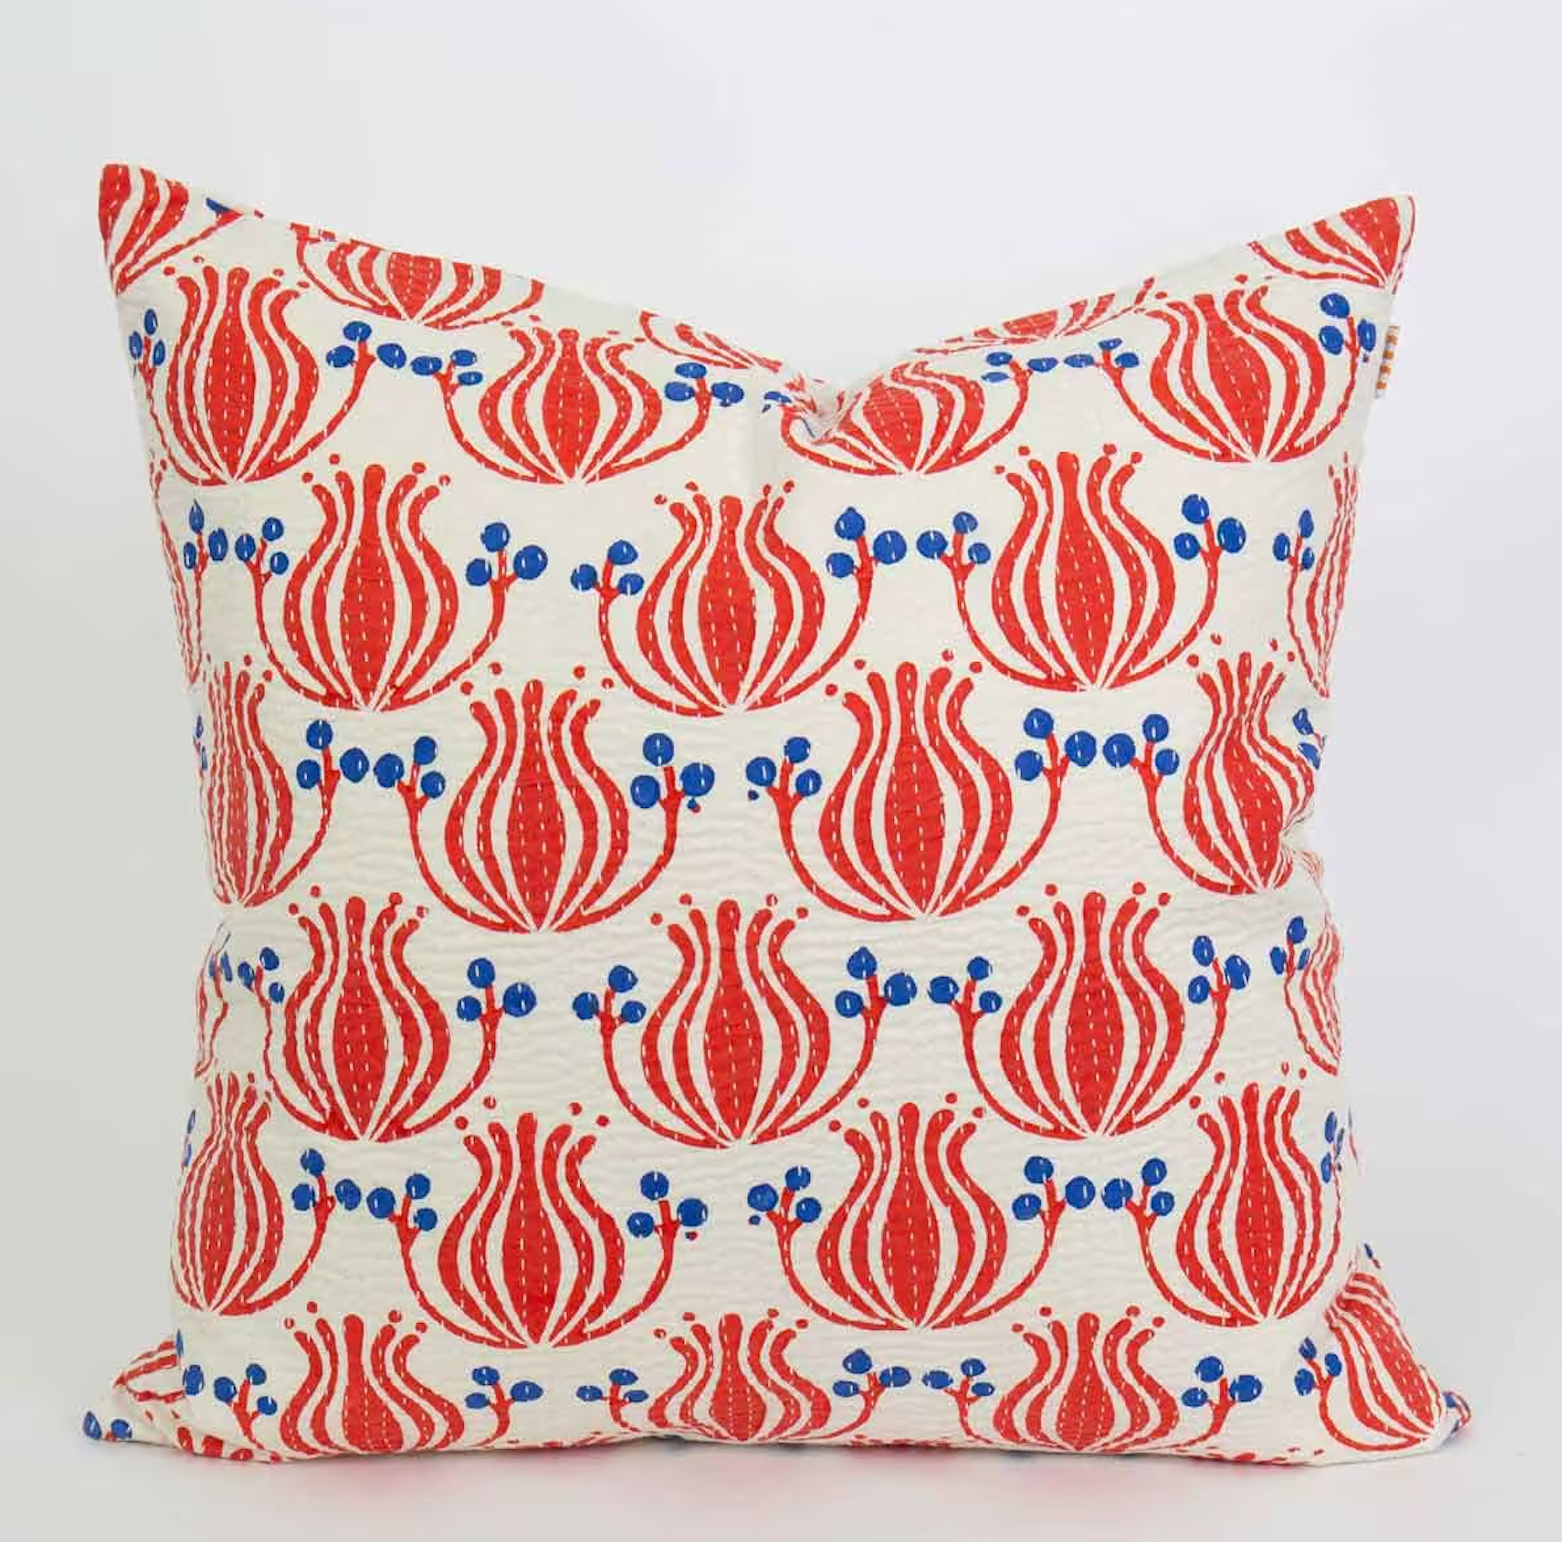 Cushion cover Flower 50x50, red / blue, handprinted